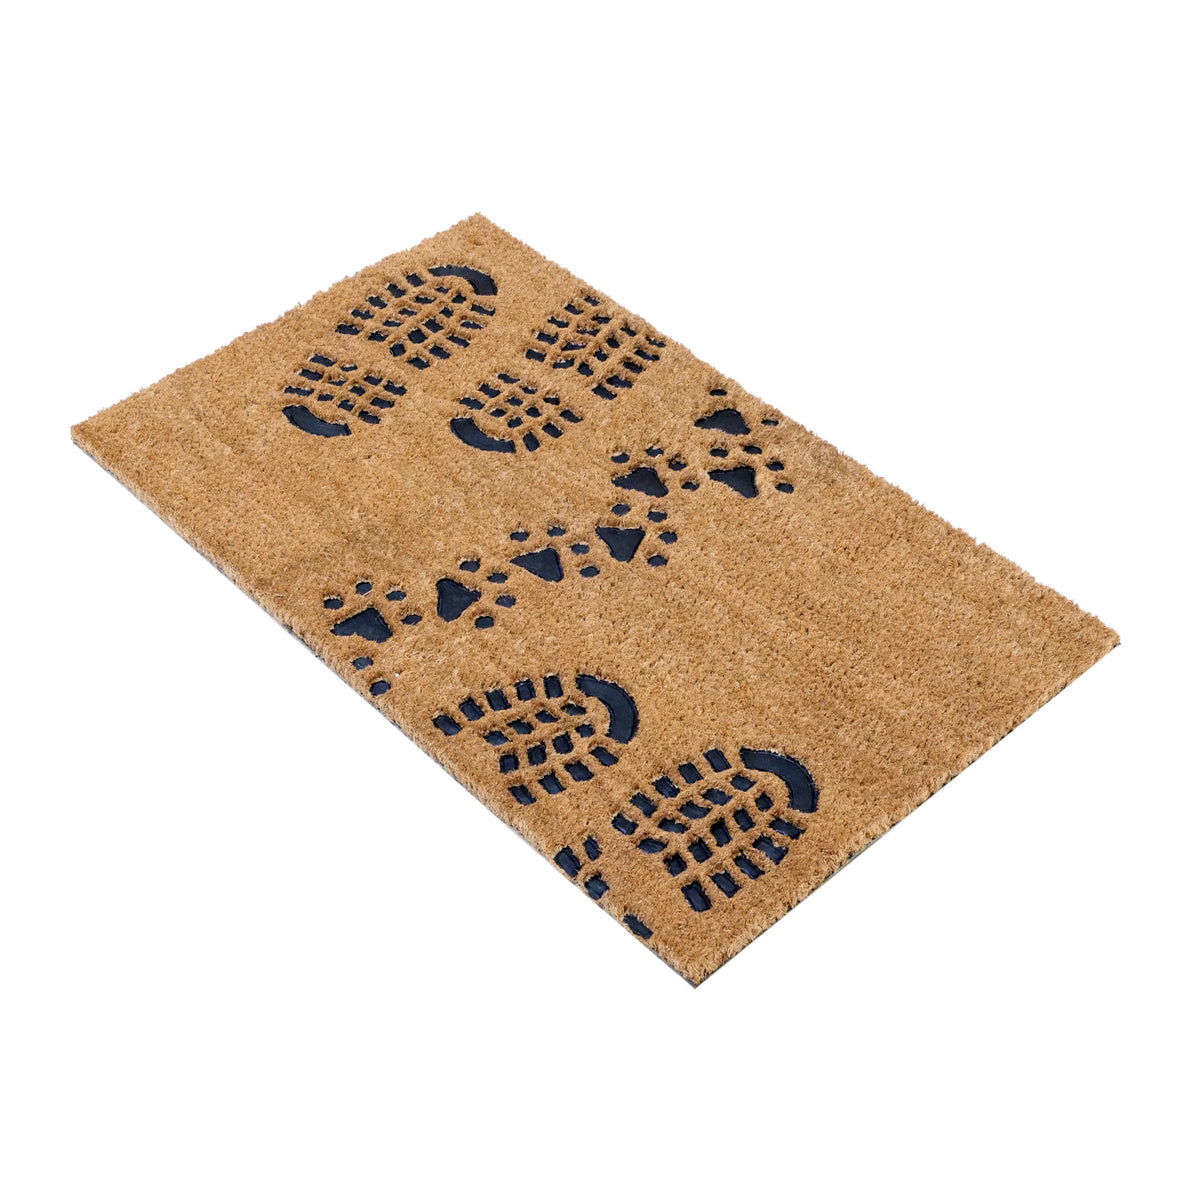 OnlyMat Foot Print with Dog Paws Moulded Rubber Coir Mat 45cm x 75cm